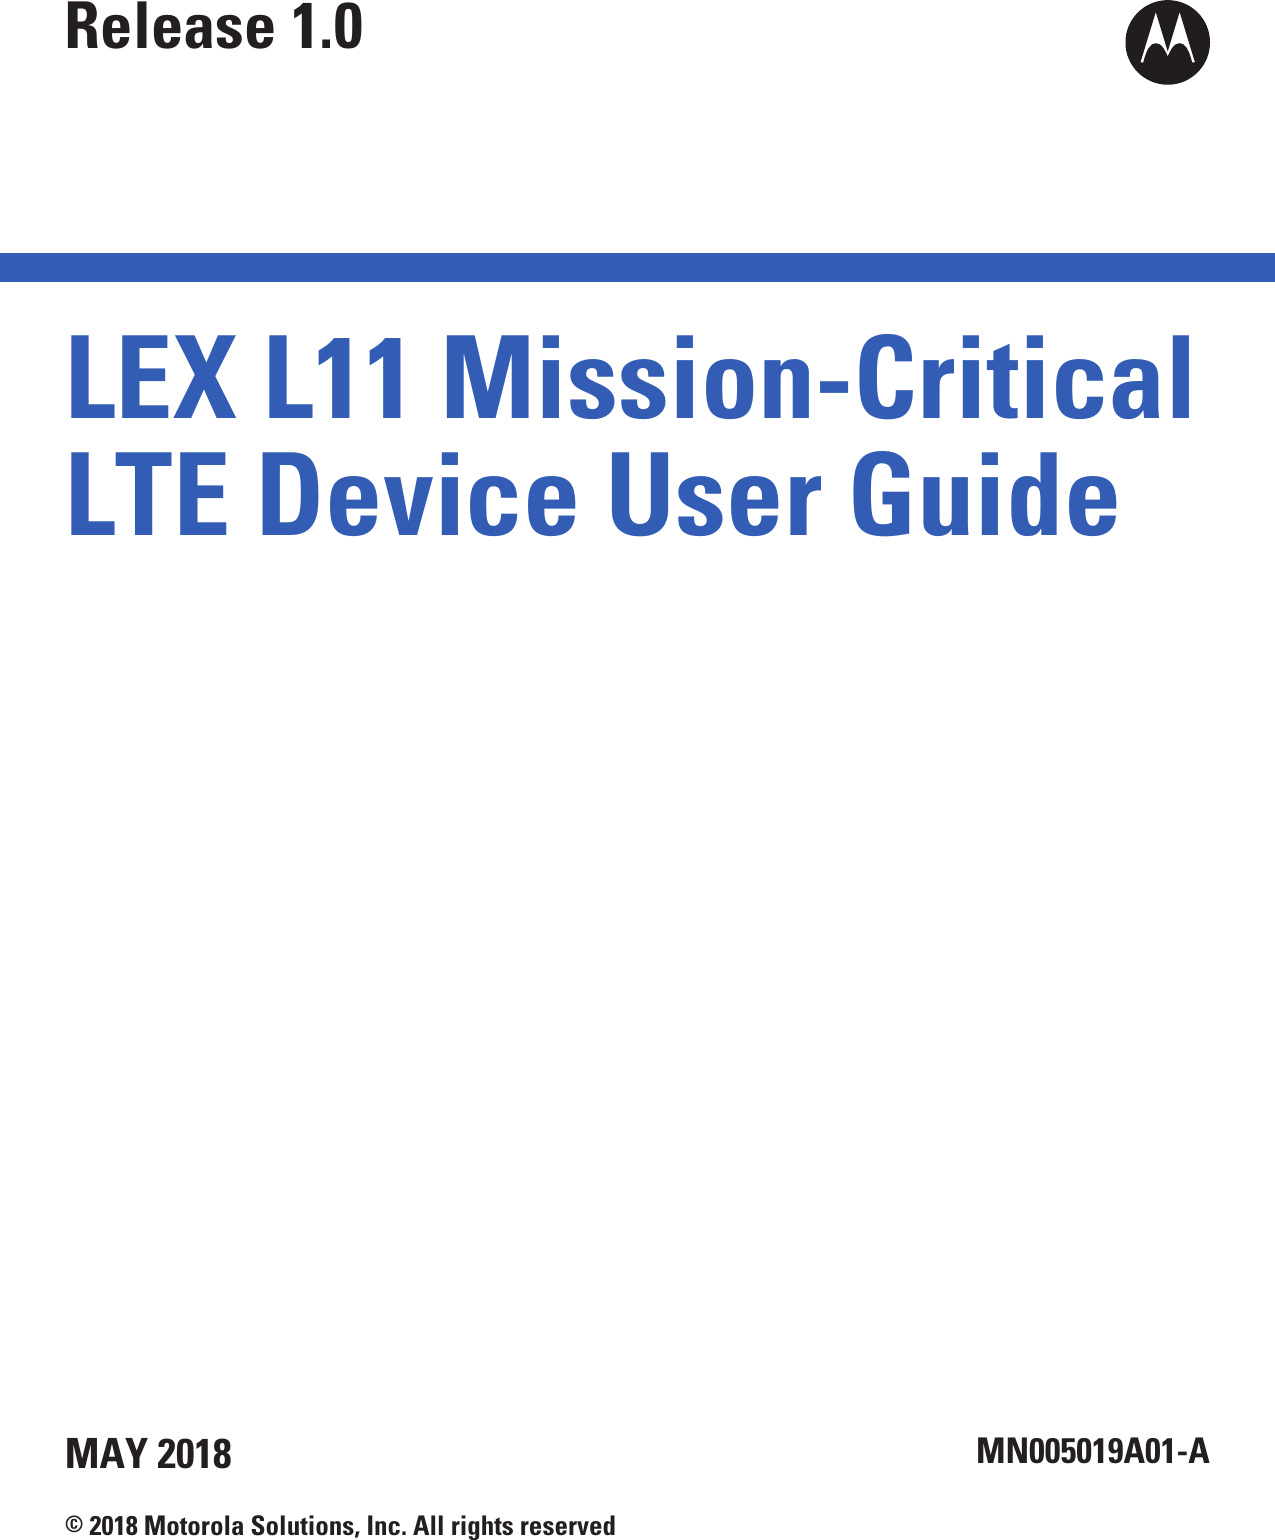 LEX L11 Mission-CriticalLTE Device User GuideRelease 1.0MN005019A01-AMAY 2018© 2018 Motorola Solutions, Inc. All rights reserved